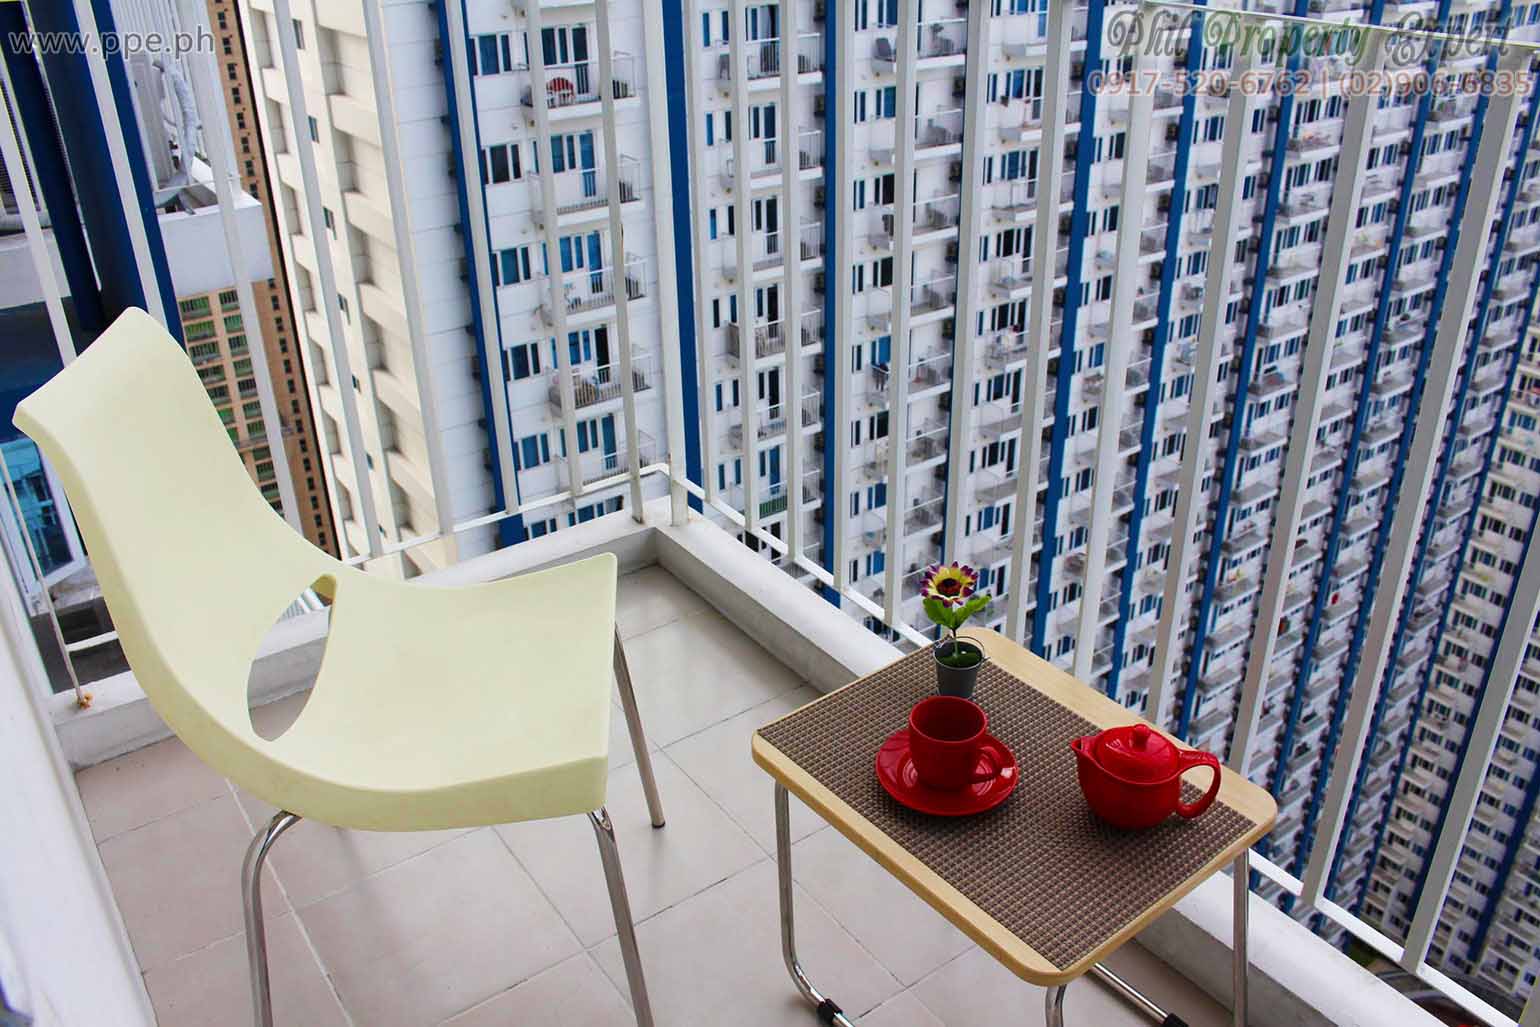 Light Residences 1 Br Condo For Rent In Mandaluyong Furnish